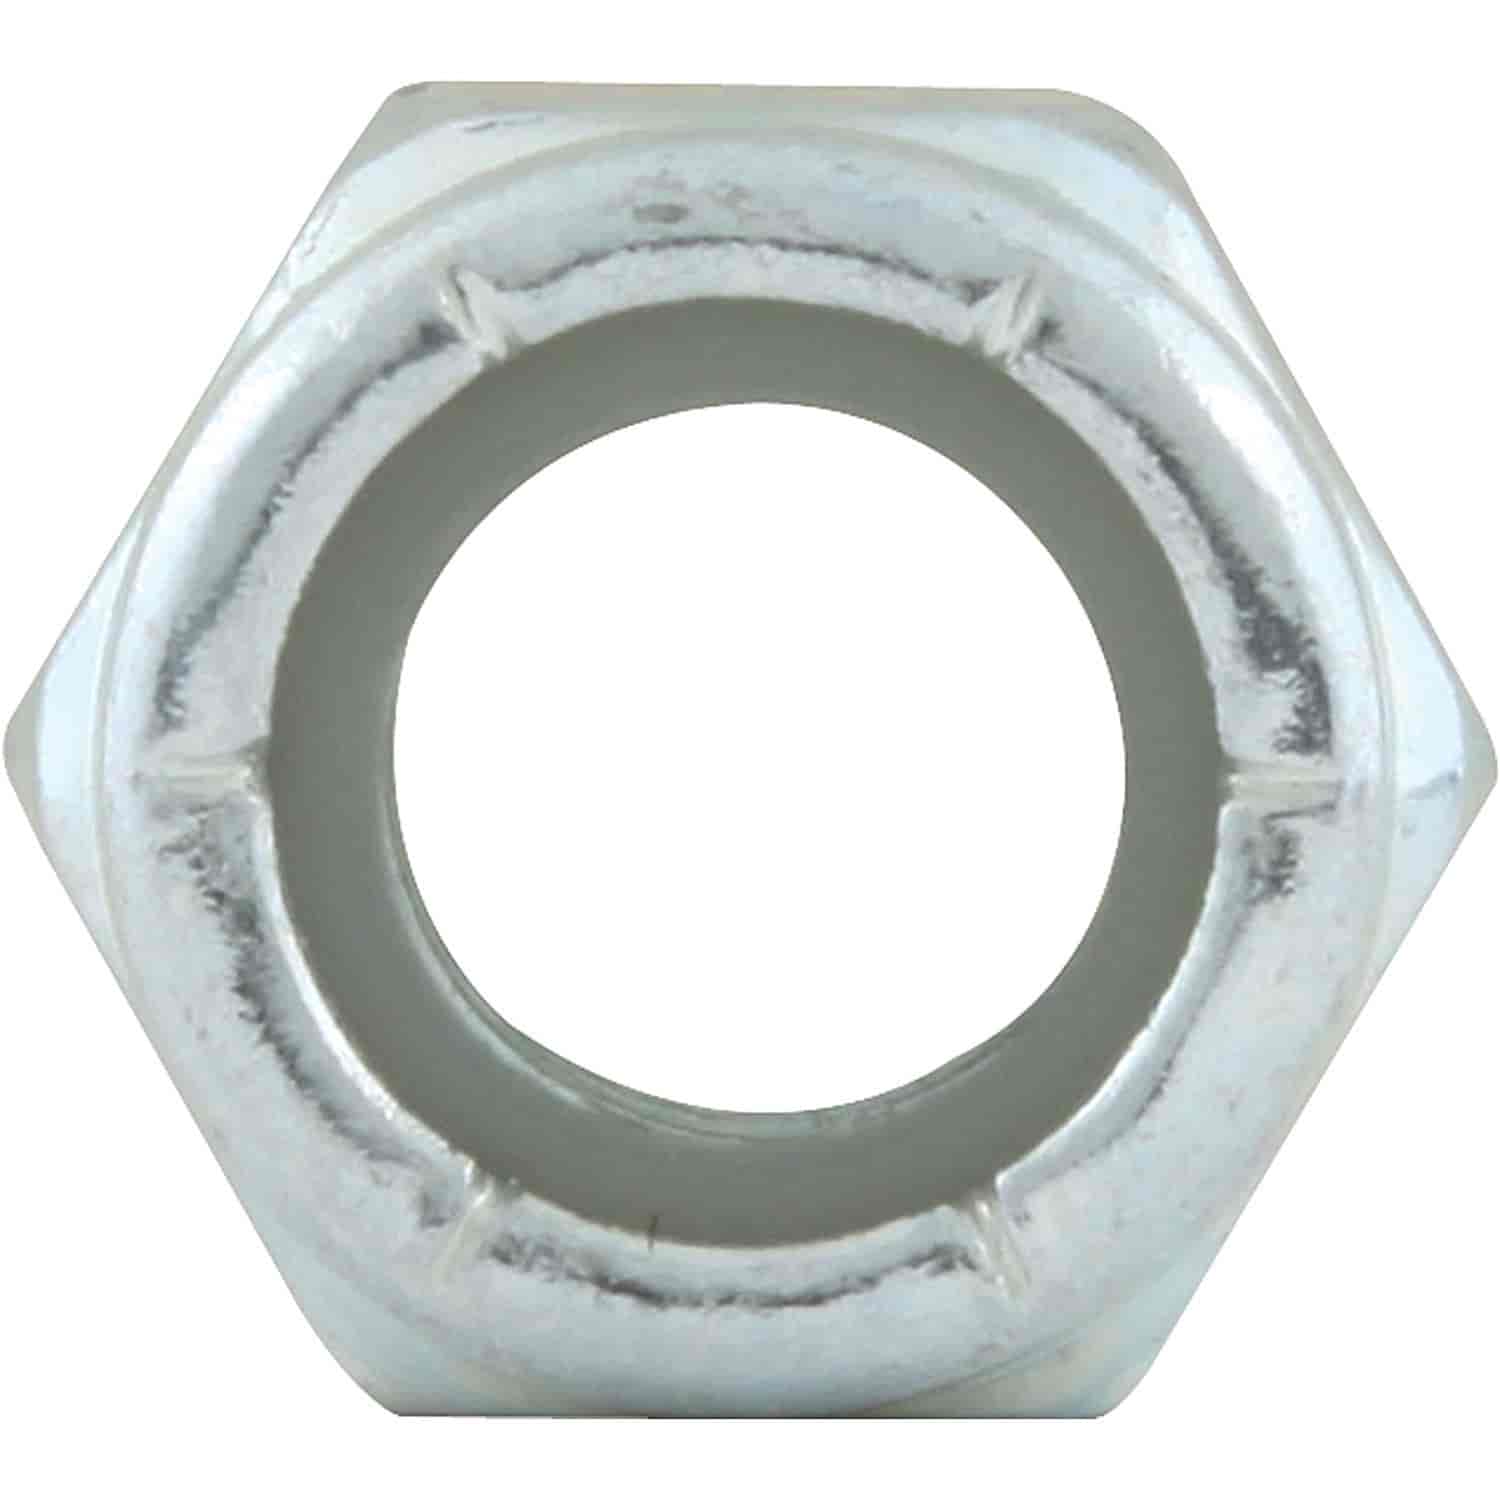 Coarse Thread Hex Nuts With Nylon Inserts 3/8"-16